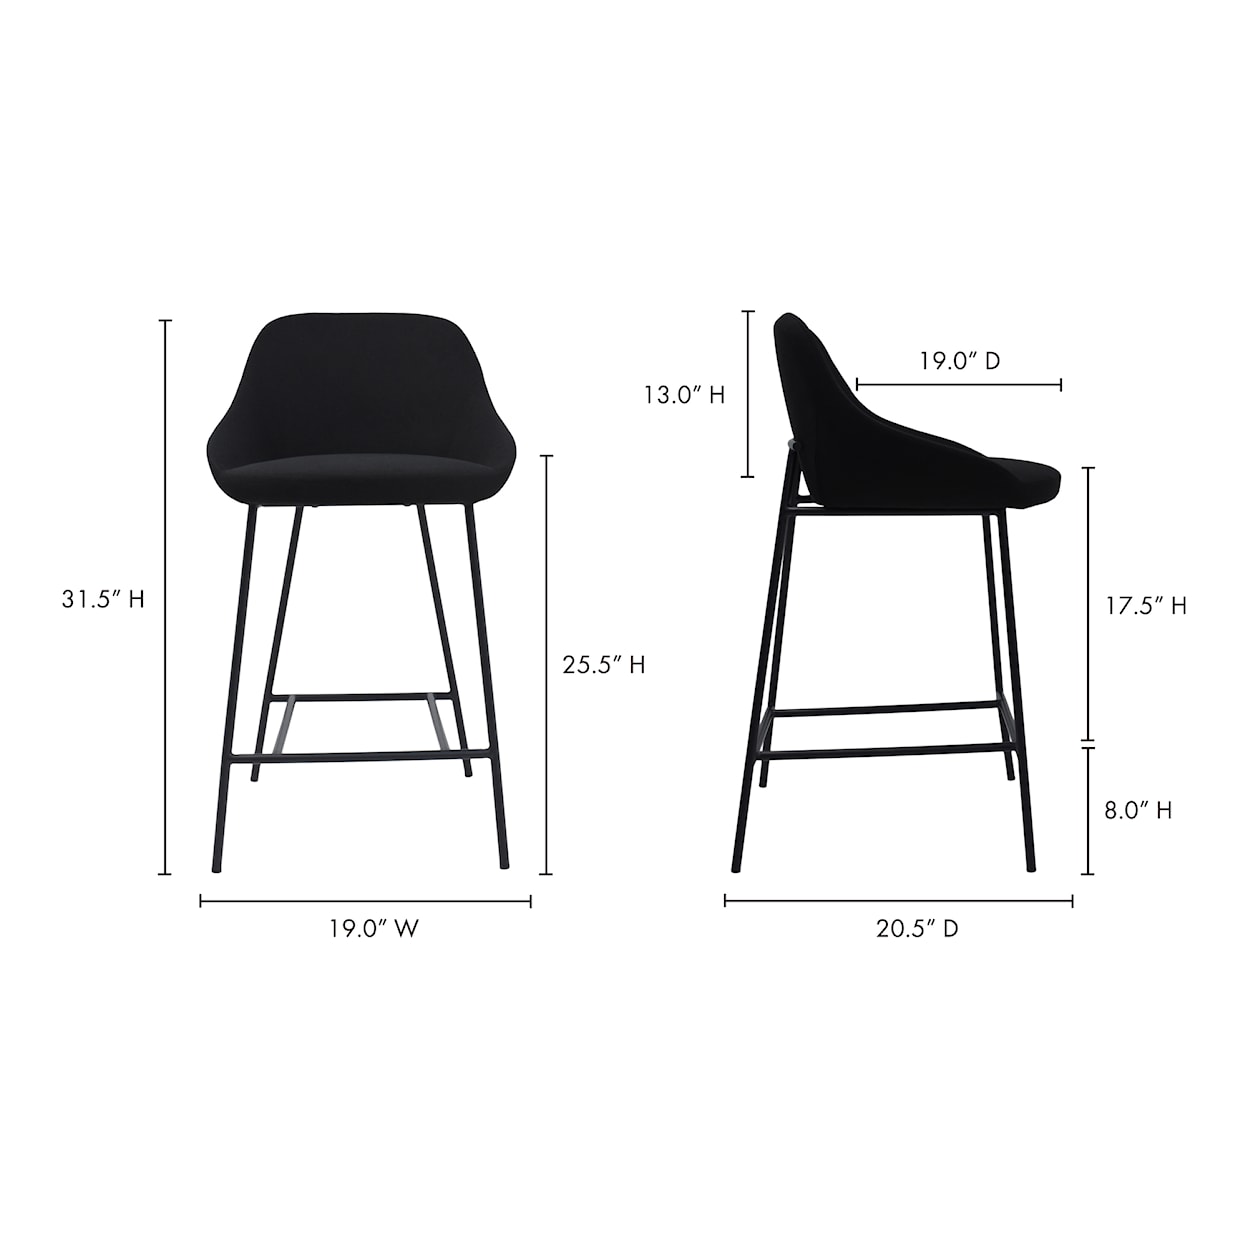 Moe's Home Collection Shelby Shelby Counter Stool Black